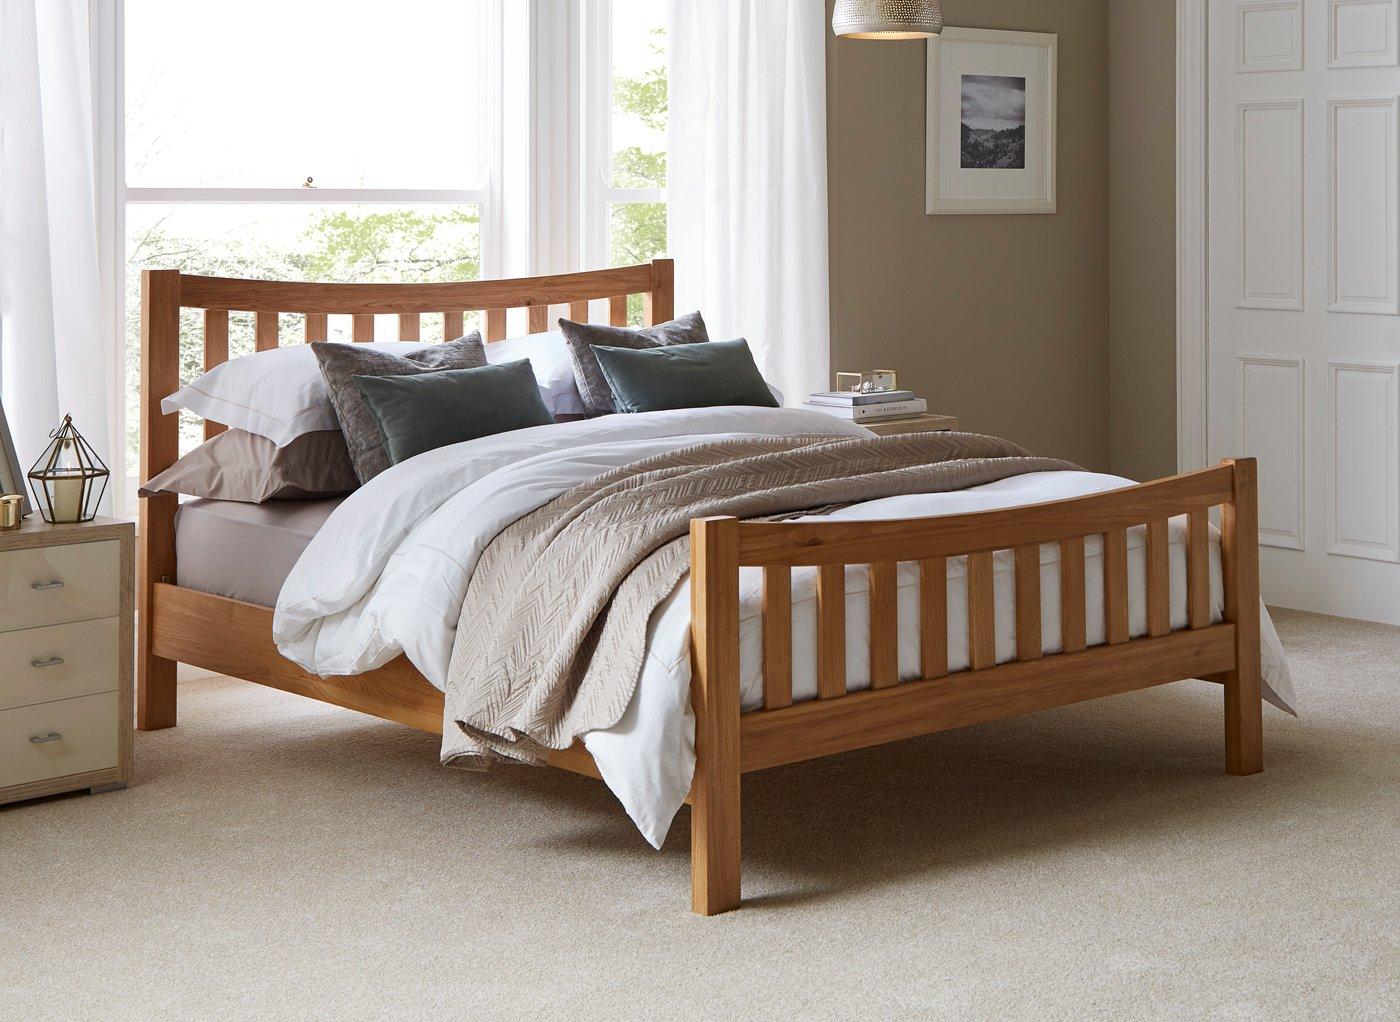 wooden bed frame with foldable mattress